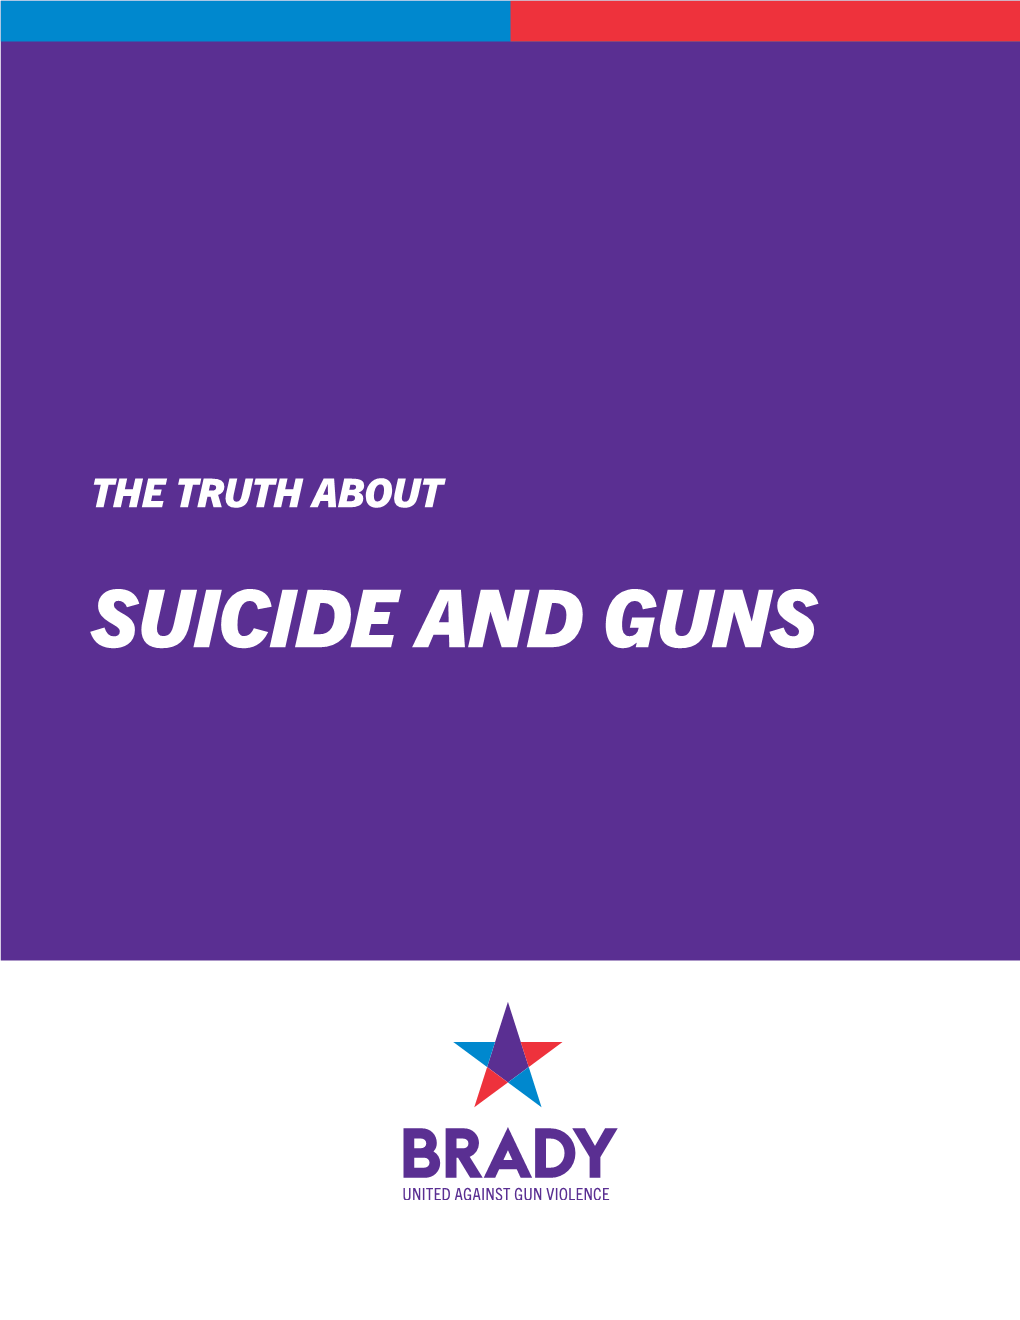 SUICIDE and GUNS If You Or Someone You Know Is Contemplating Suicide, Please Call the Free and Confidential National Suicide Prevention Lifeline at 1-800-273-8255